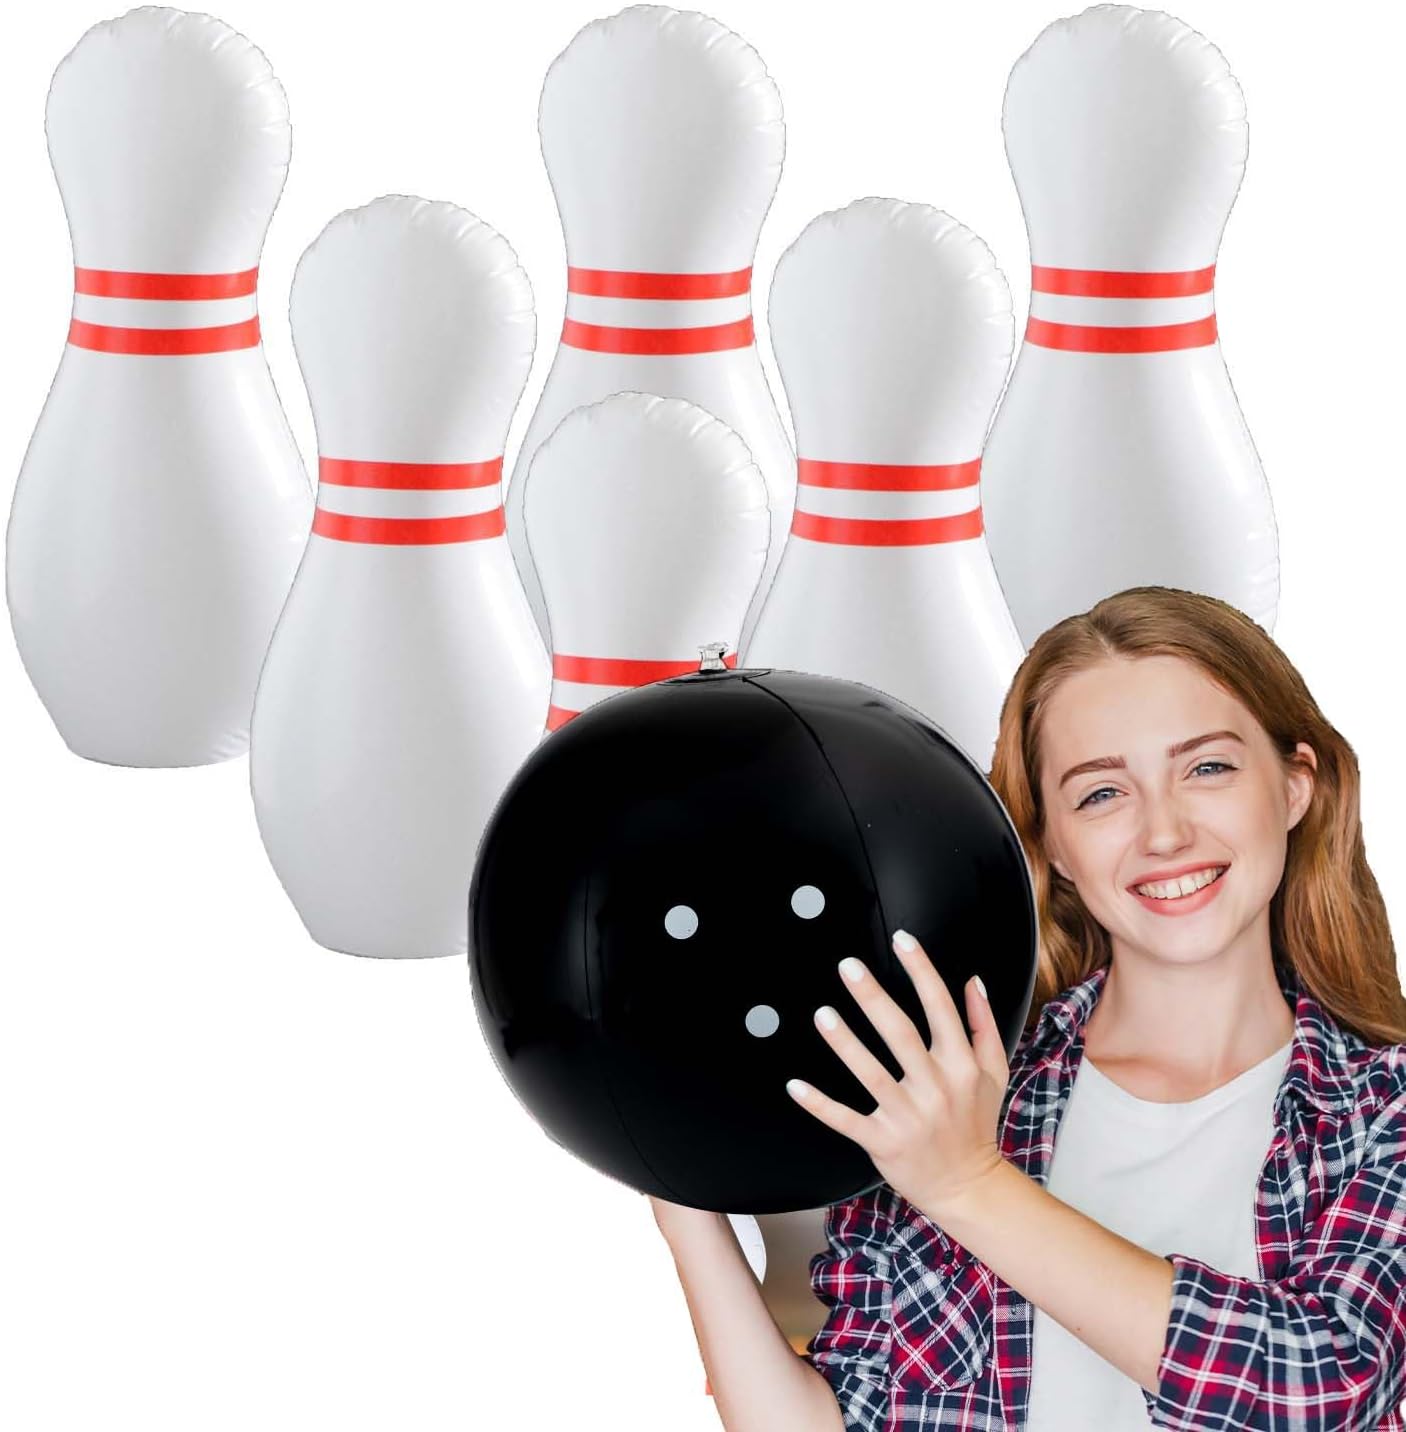 Zloveleexr Bowling Set for Kids and Adults, Christmas Birthday Party Games, Kids Education Motor Skills Toys,Perfect Outdoor Toys